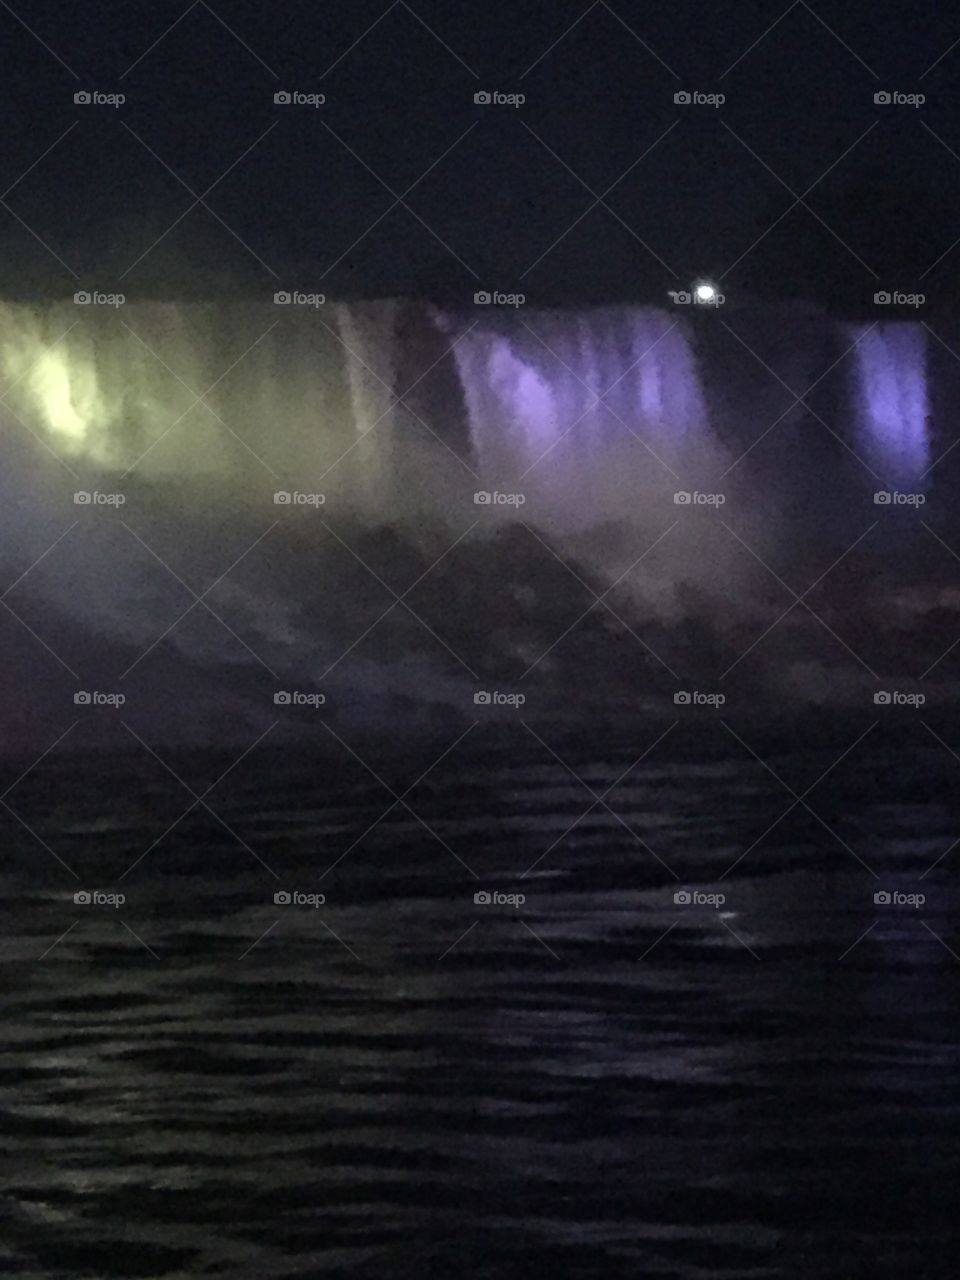 Niagara Falls light up beautifully on a dark night. The multicolored lights catch the mist and dance across the water. 